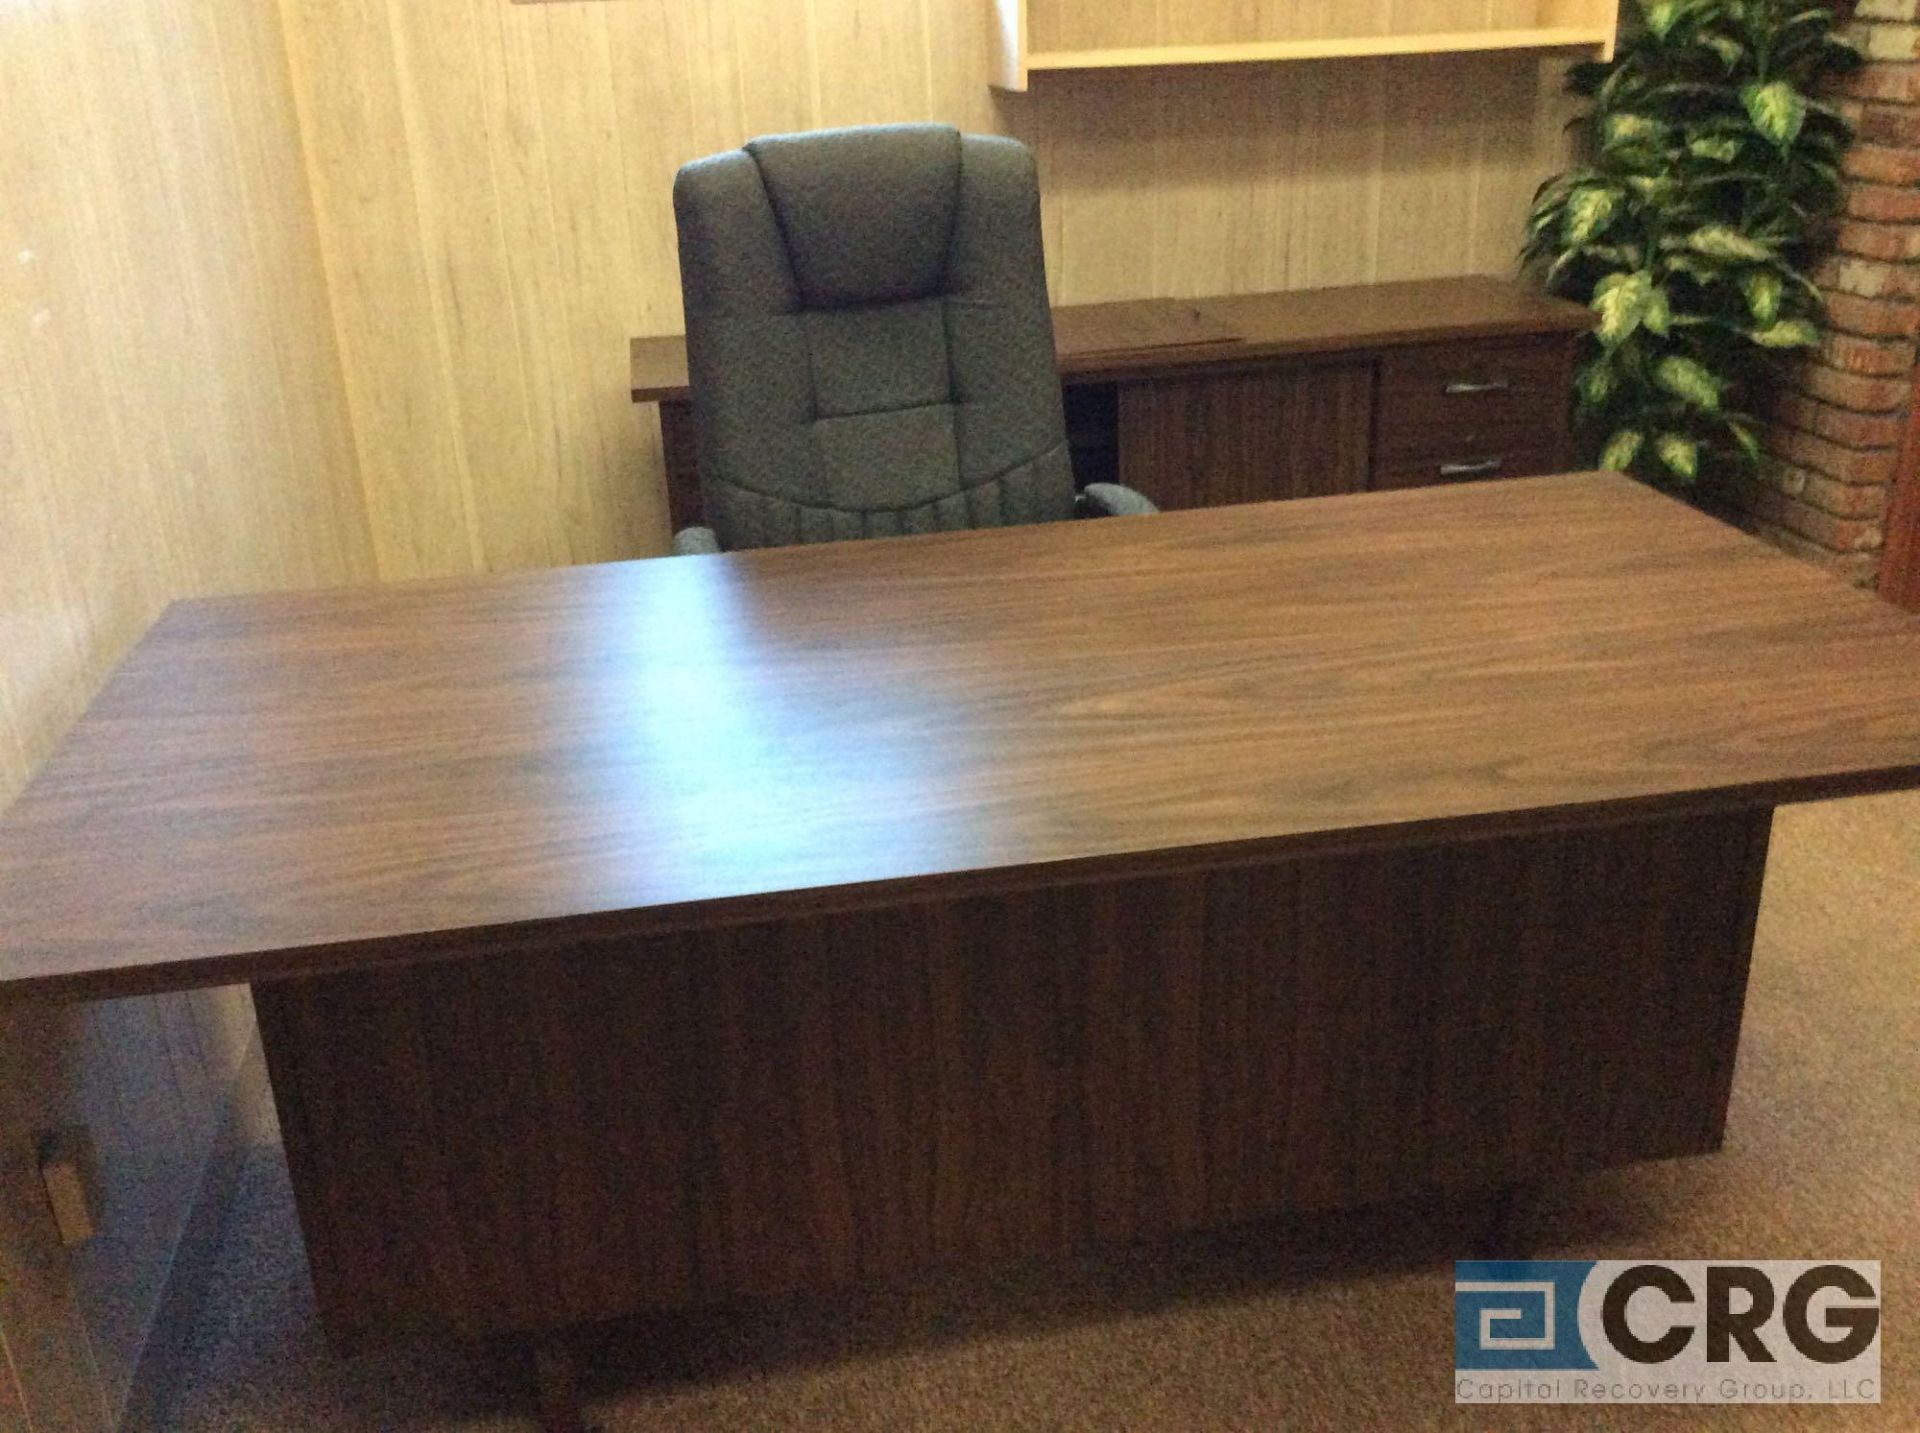 Lot of assorted office furnishings etc, including desks, chairs, file cabinets, bookcases etc, - Image 6 of 15